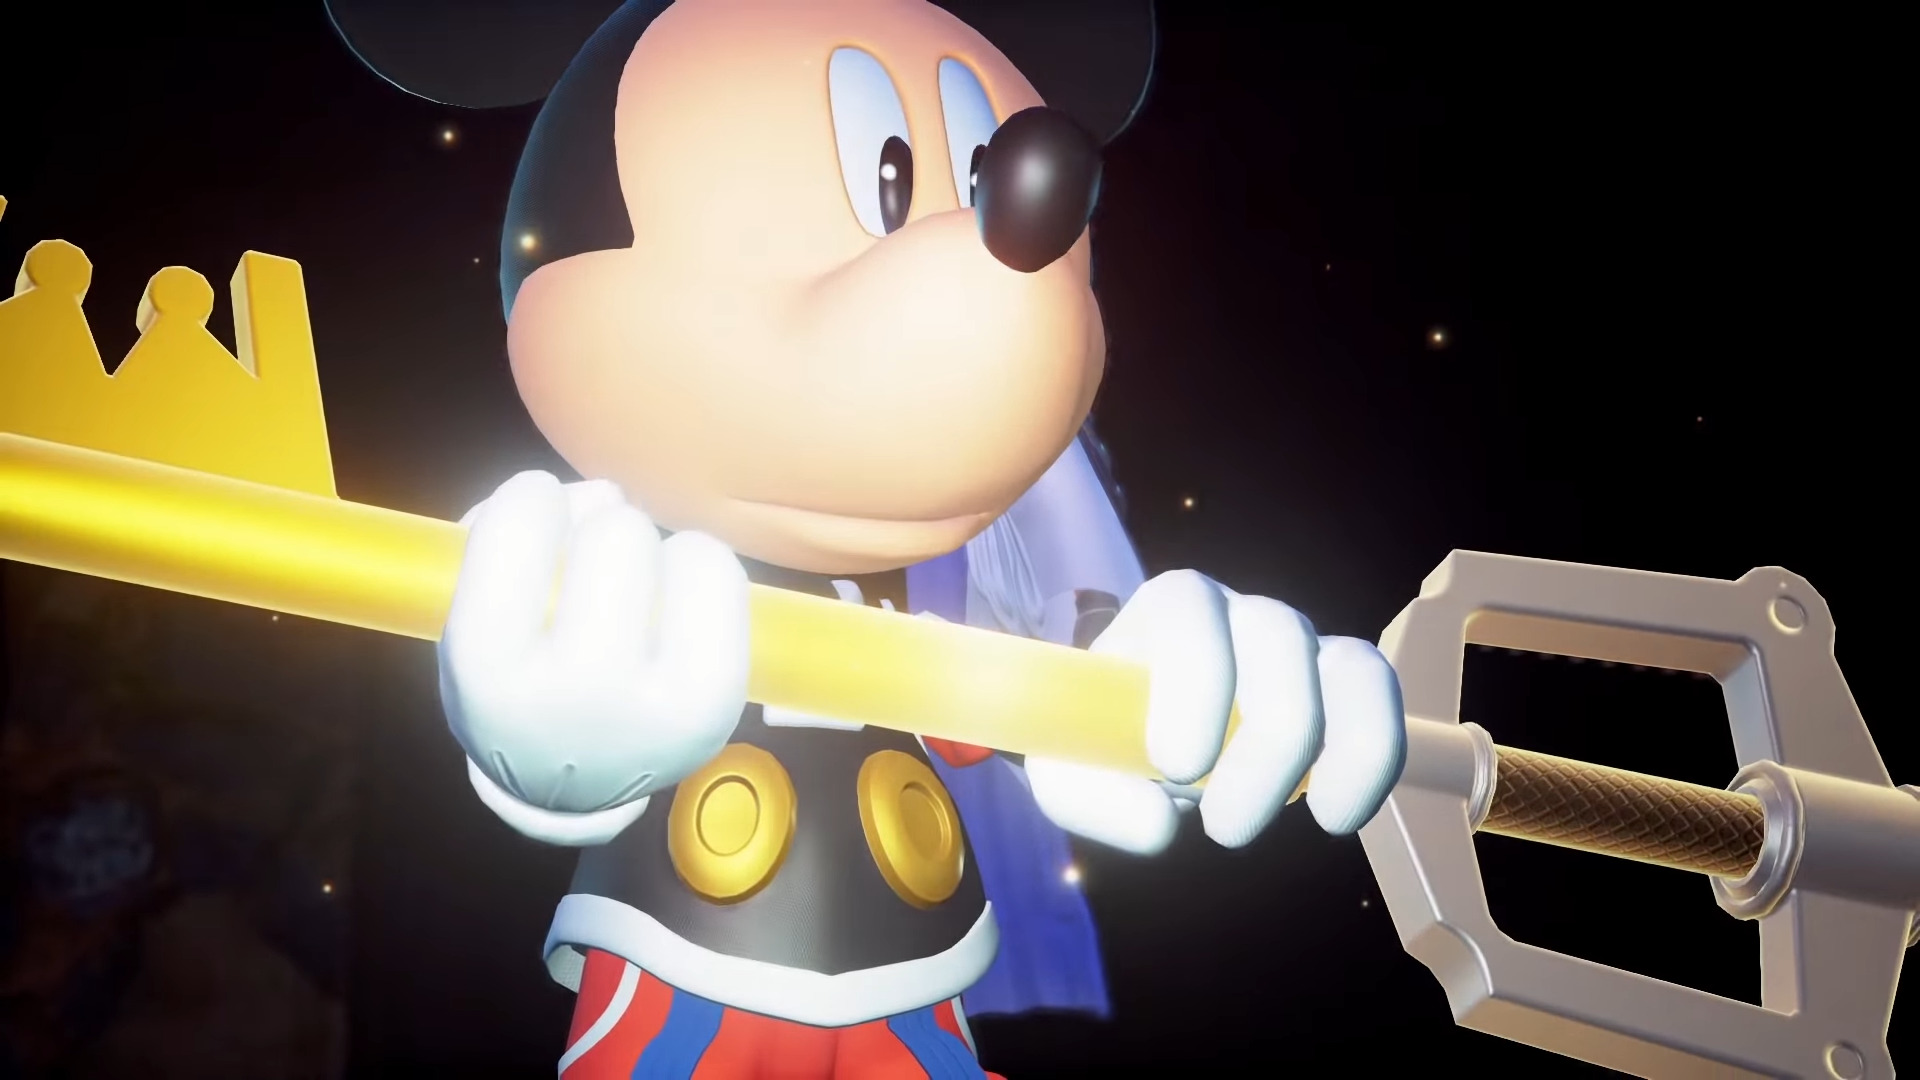 Mickey Mouse (Chris Diamantopoulos) discovers the Kingdom Key D in Kingdom Hearts 0.2 Birth by Sleep - A Fragmentary Passage (2017), Square Enix